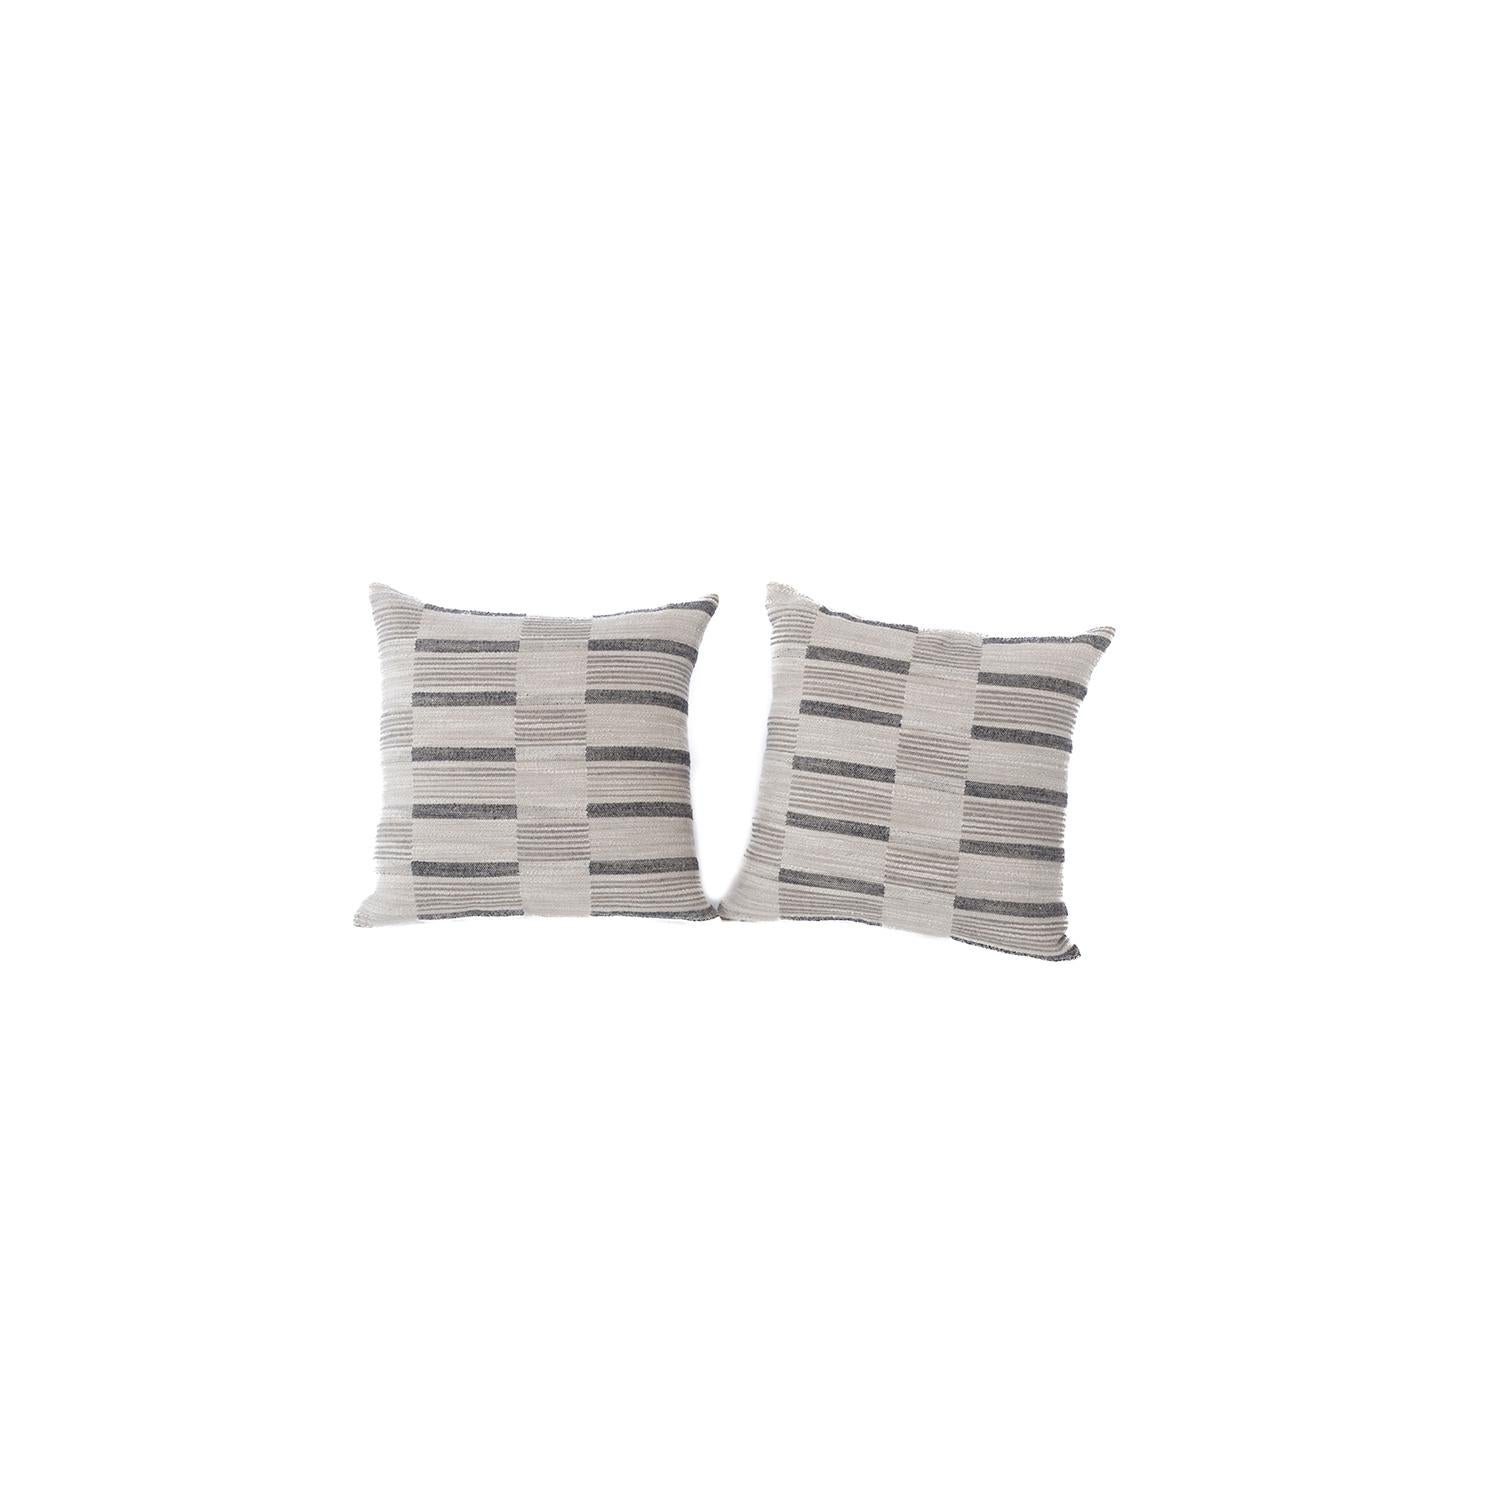 These new down filled pillows are crafted from a luxurious textured slub wool & linen blend textile.  Cream, warm grey and charcoal tones in a sophisticated broken stripe motif.  conceptualized and created by the danish teak classics design unit.